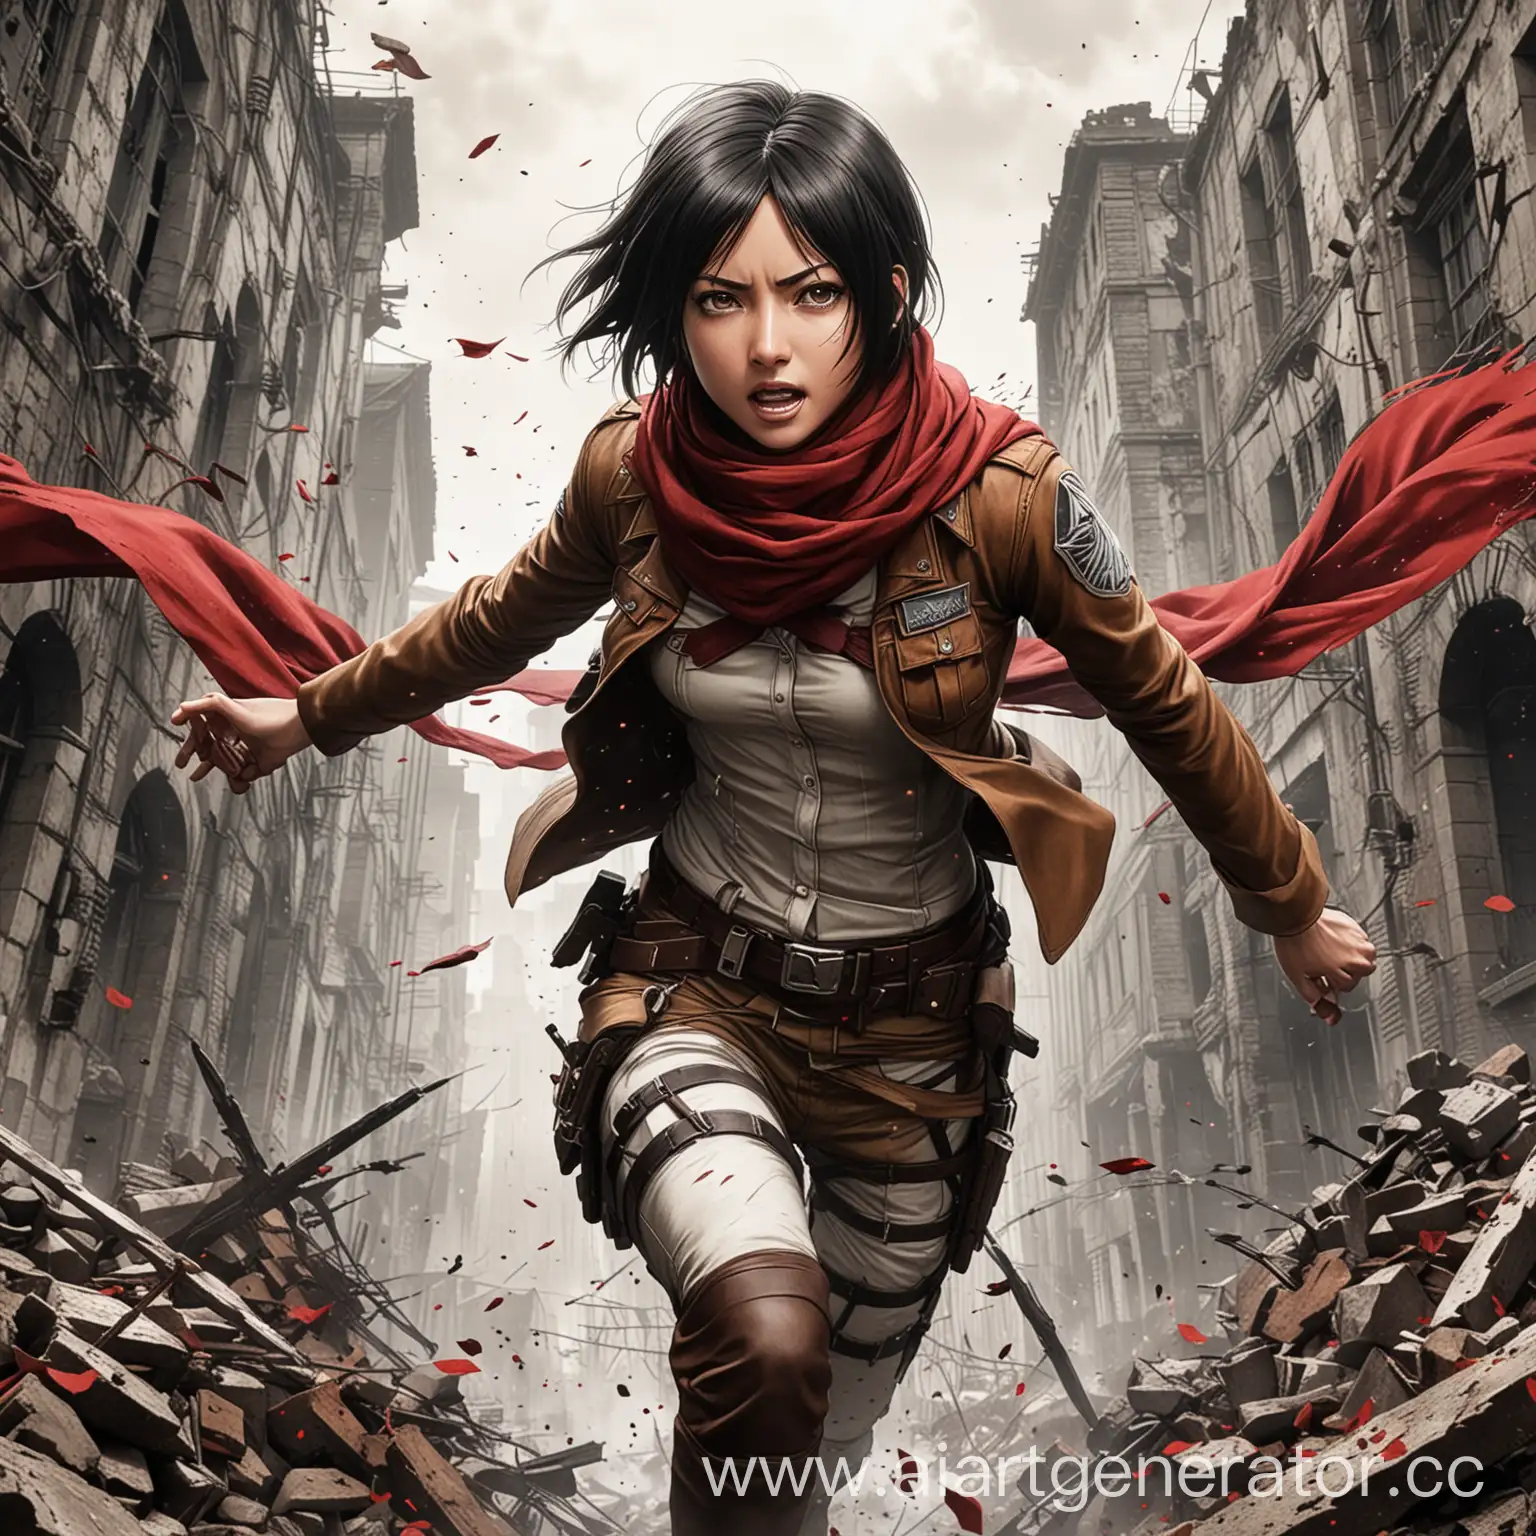 Mikasa Ackerman from "Attack on Titan", mid-action, neatly dodging debris, her iconic red scarf flutters, Survey Corps uniform displaying movement and detail, city ruins backdrop, dynamic angle, intense facial expression, pen and ink, dramatic lighting, ultra fine details